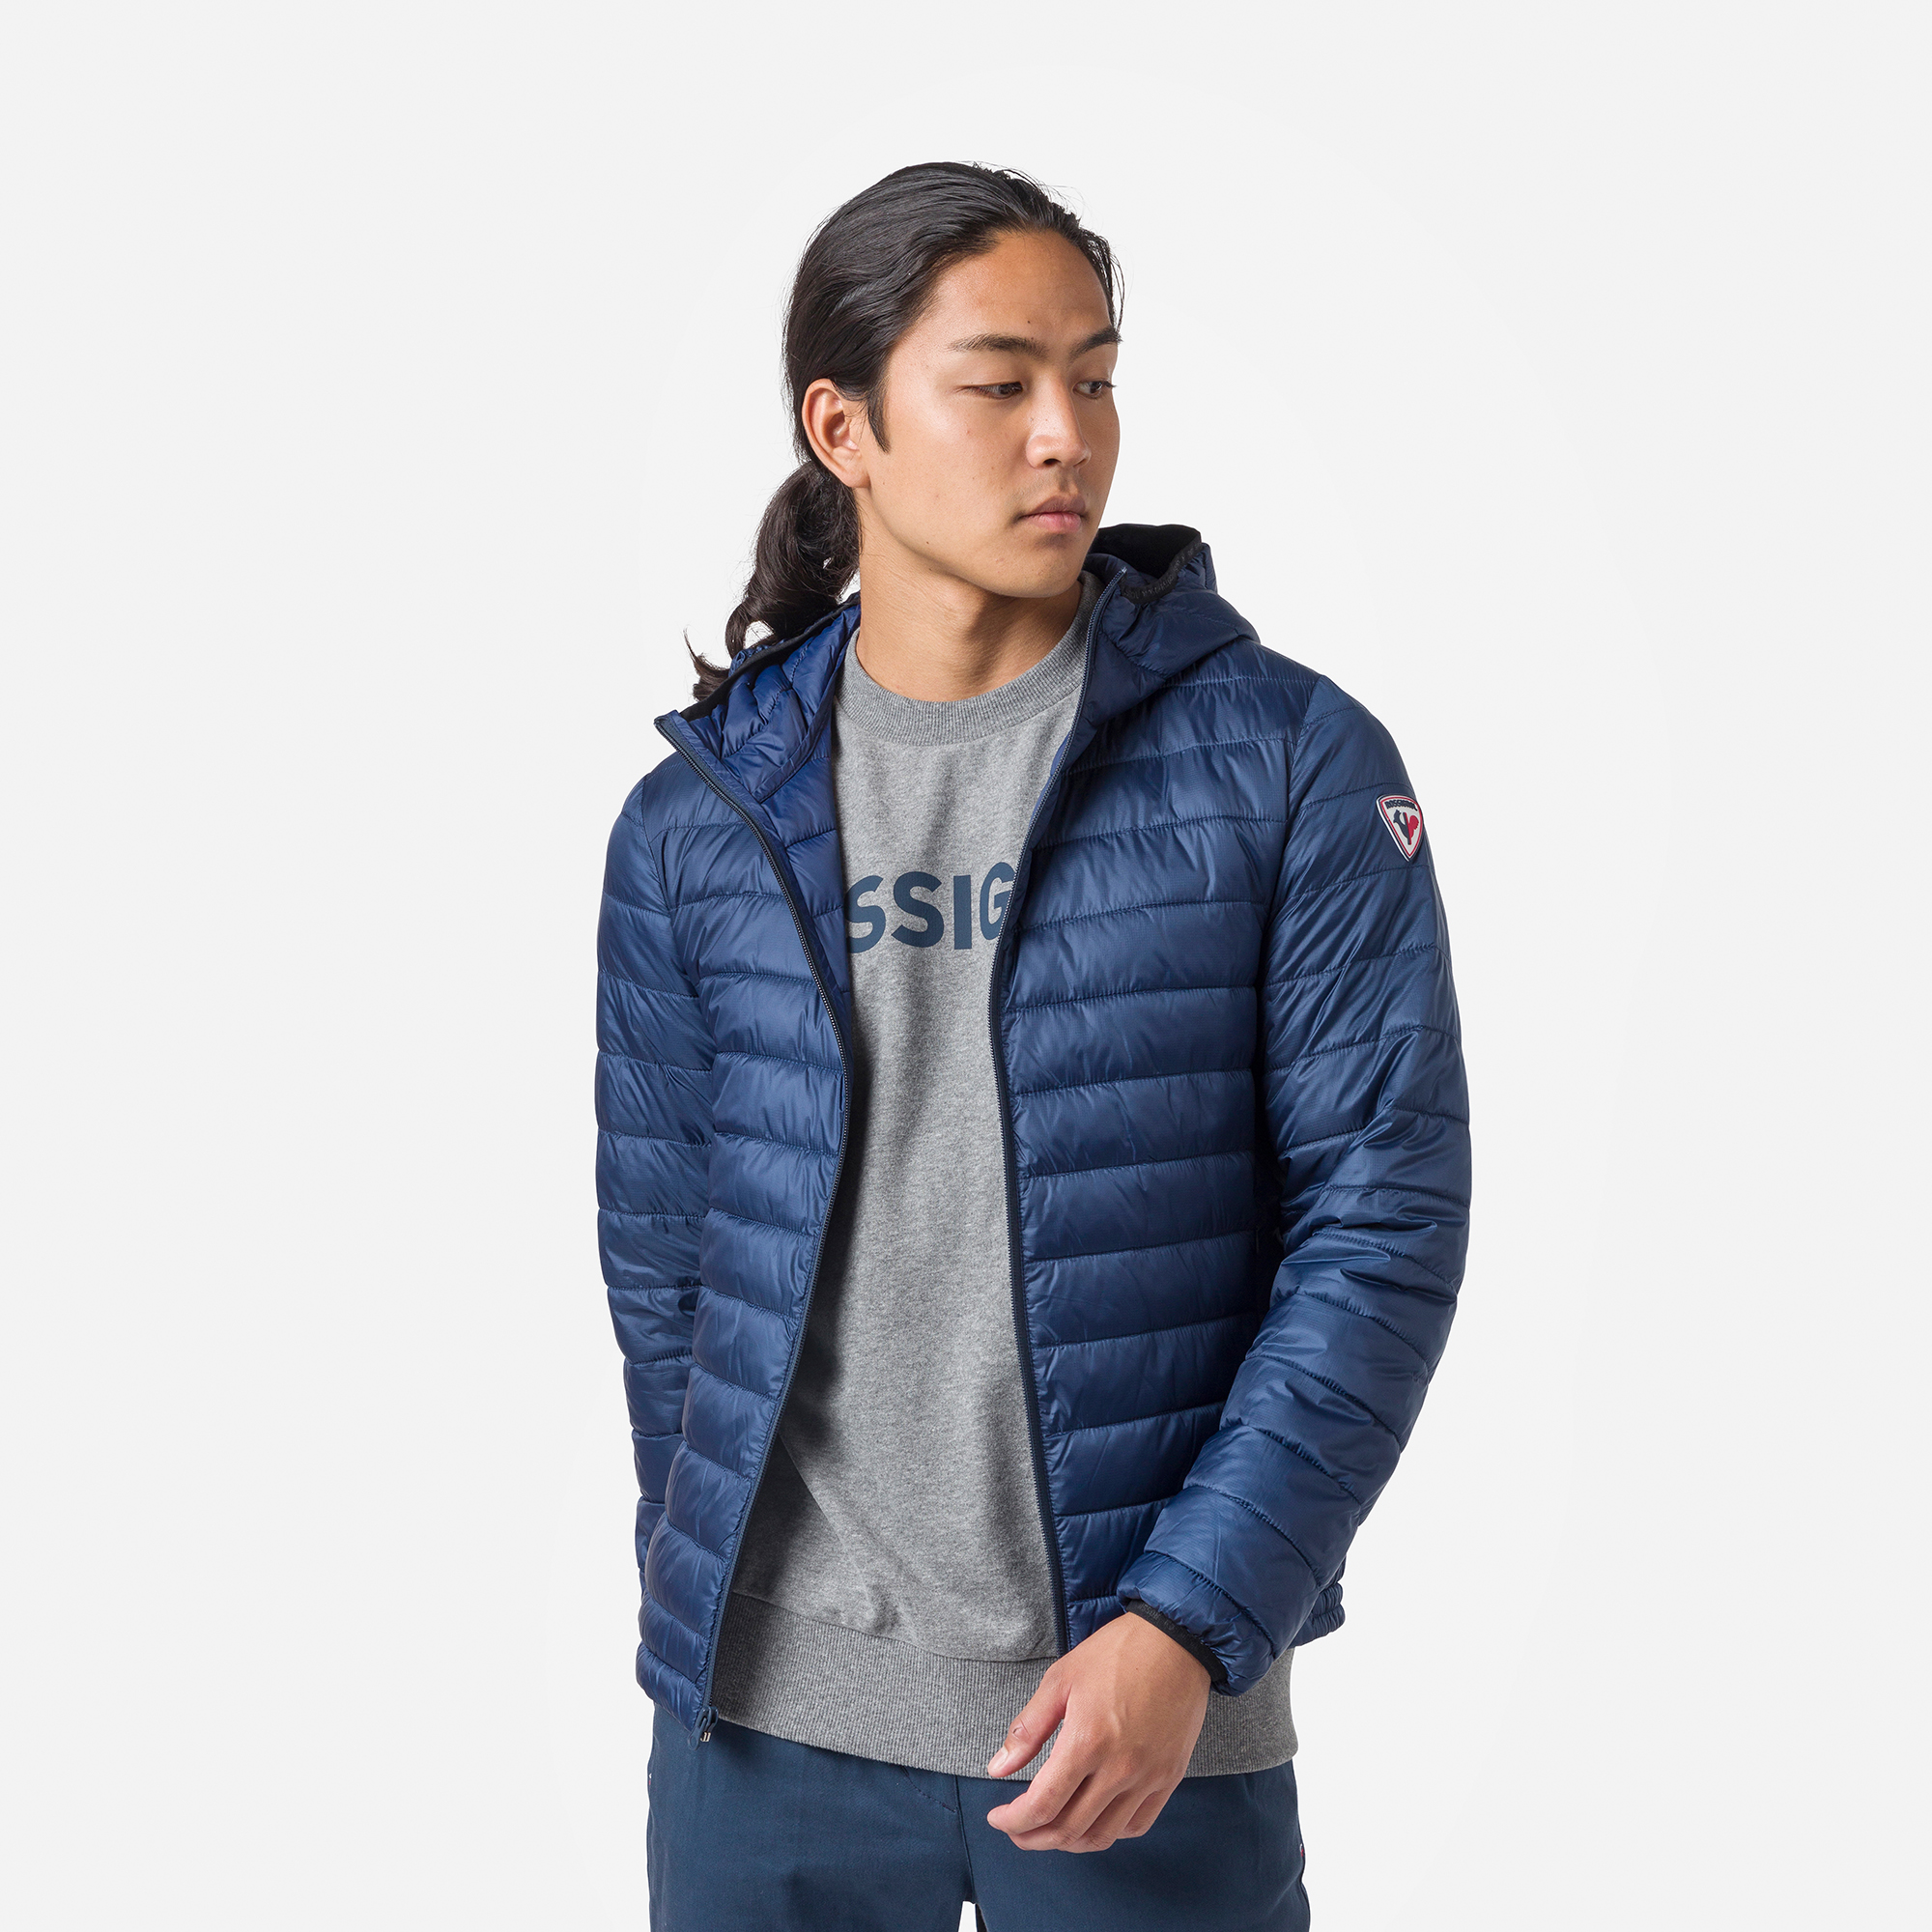 Men's Hooded Insulated Jacket